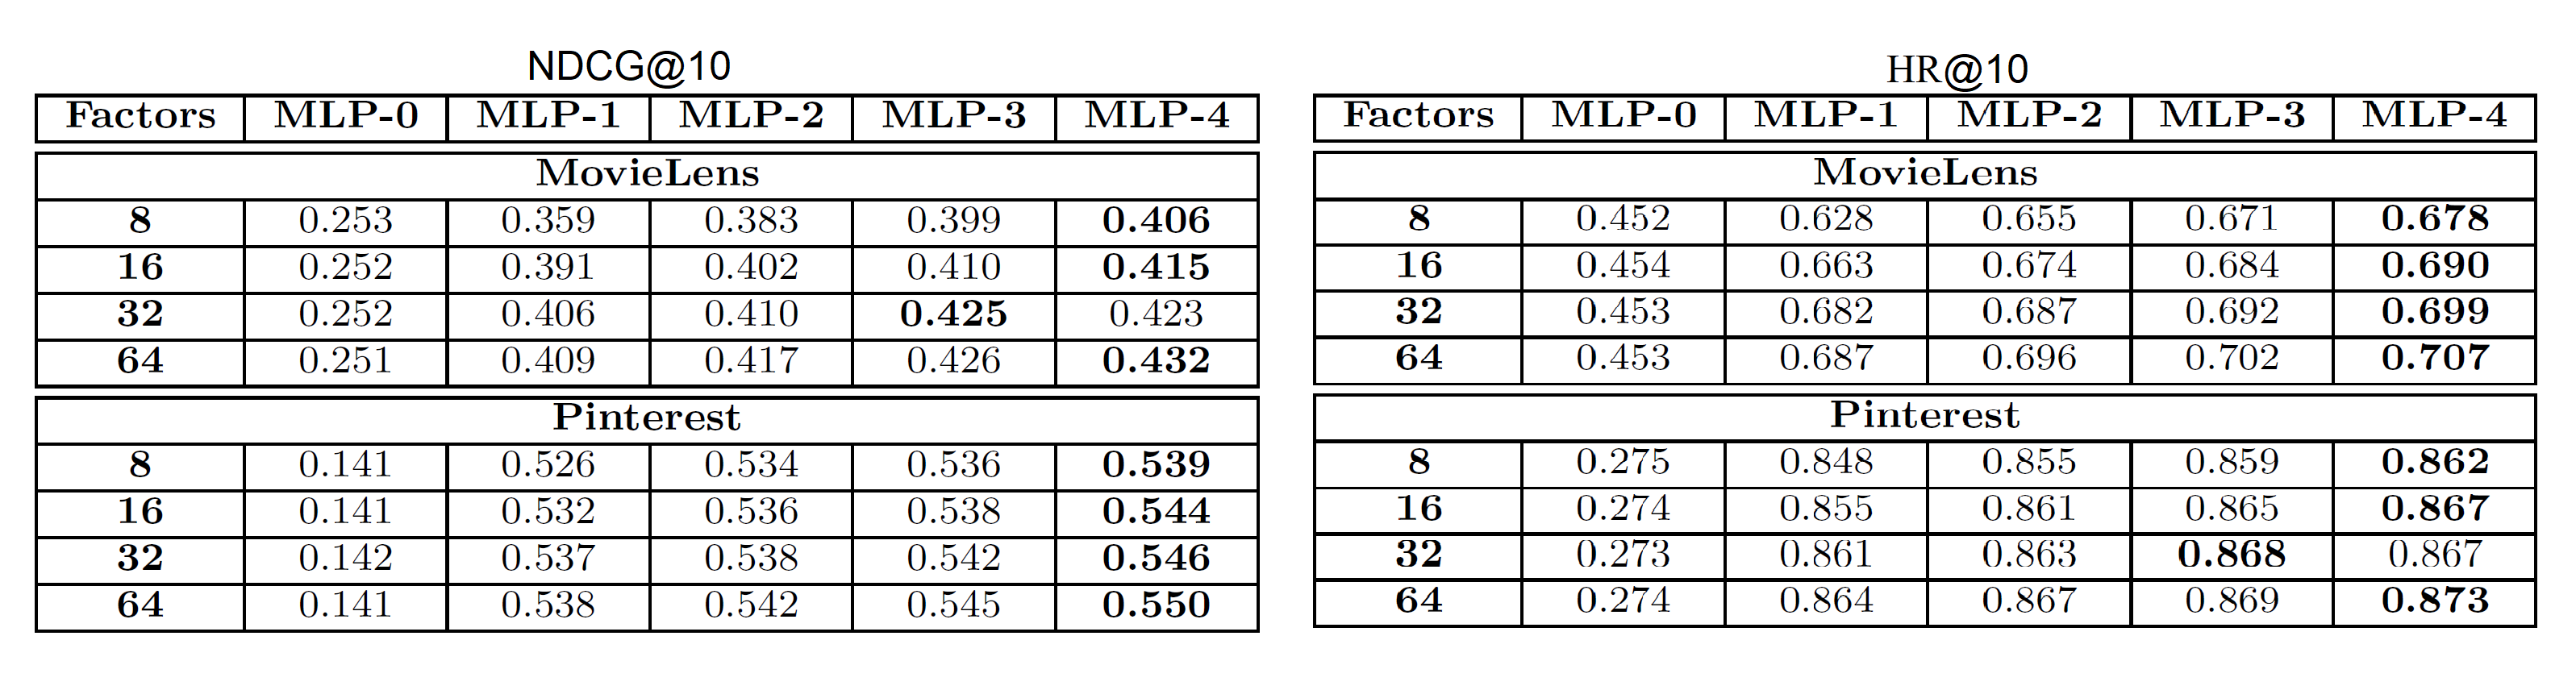 Performance of NeuMF with and without pre-training